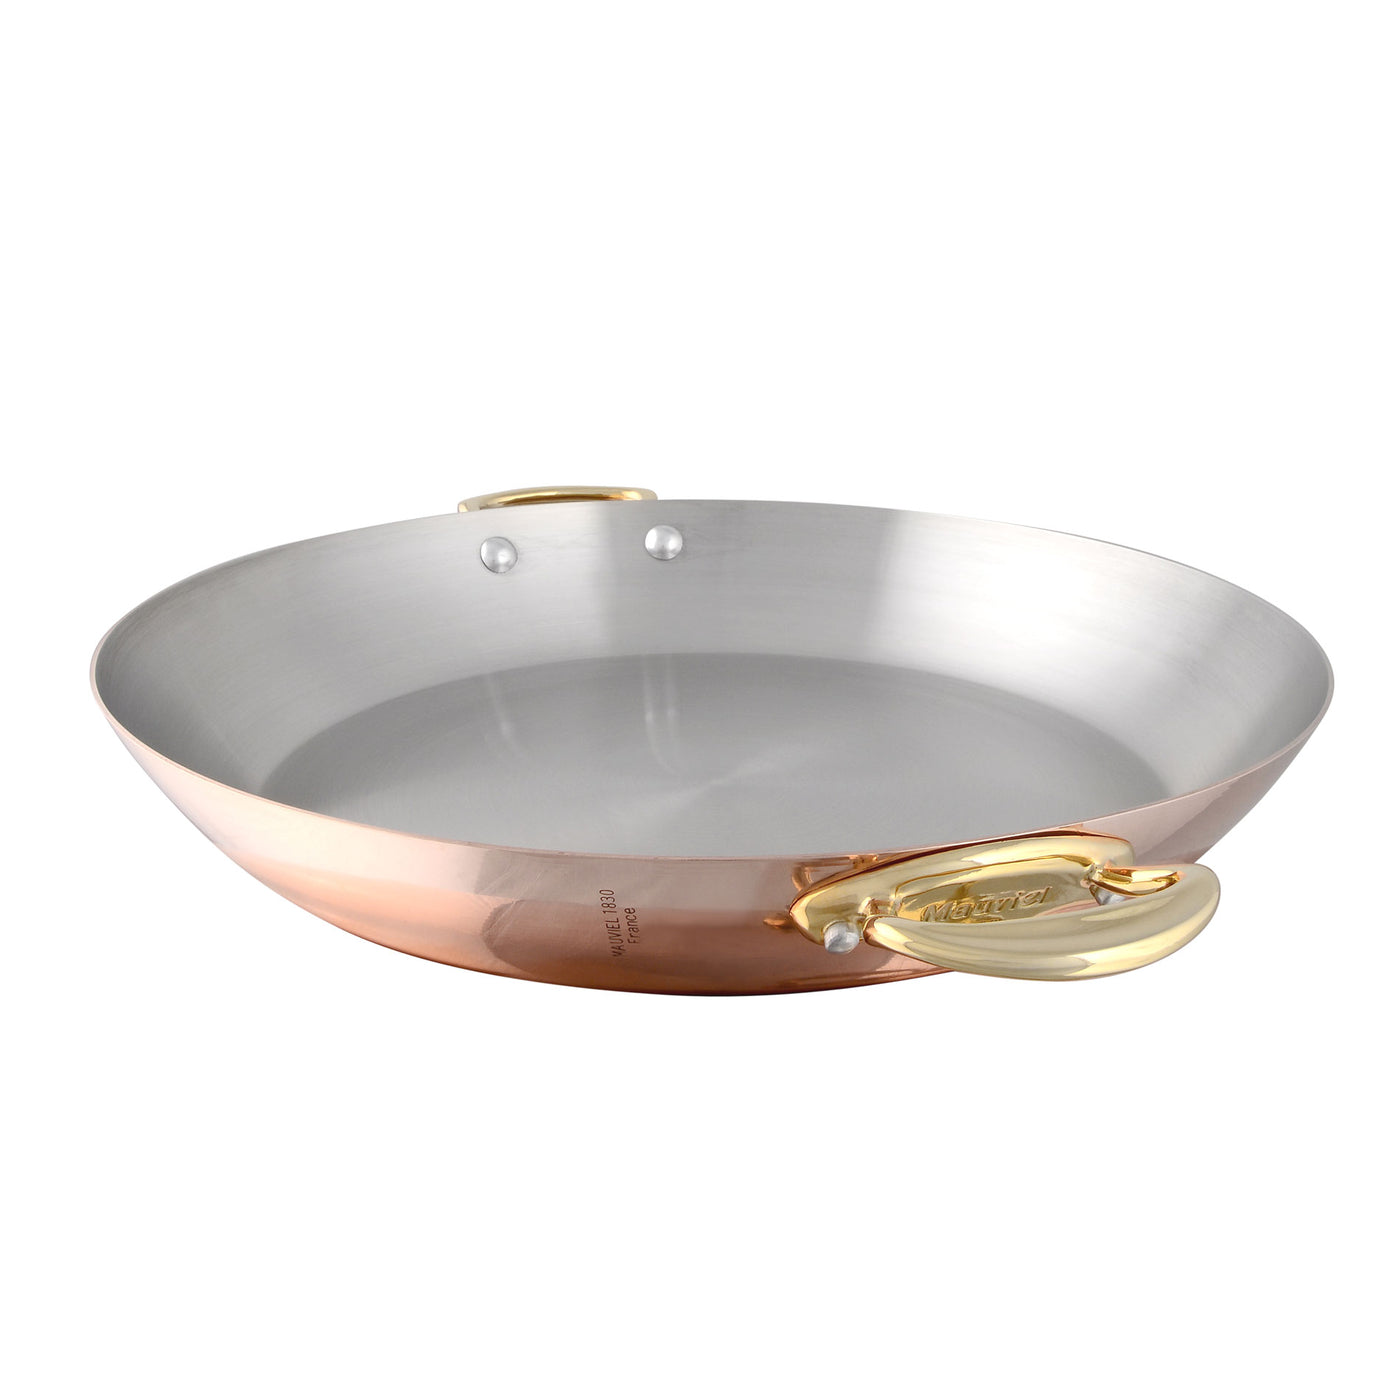 Mauviel M'heritage M150B Copper Paella Pan with Bronze Handles, 14-in - Kitchen Universe